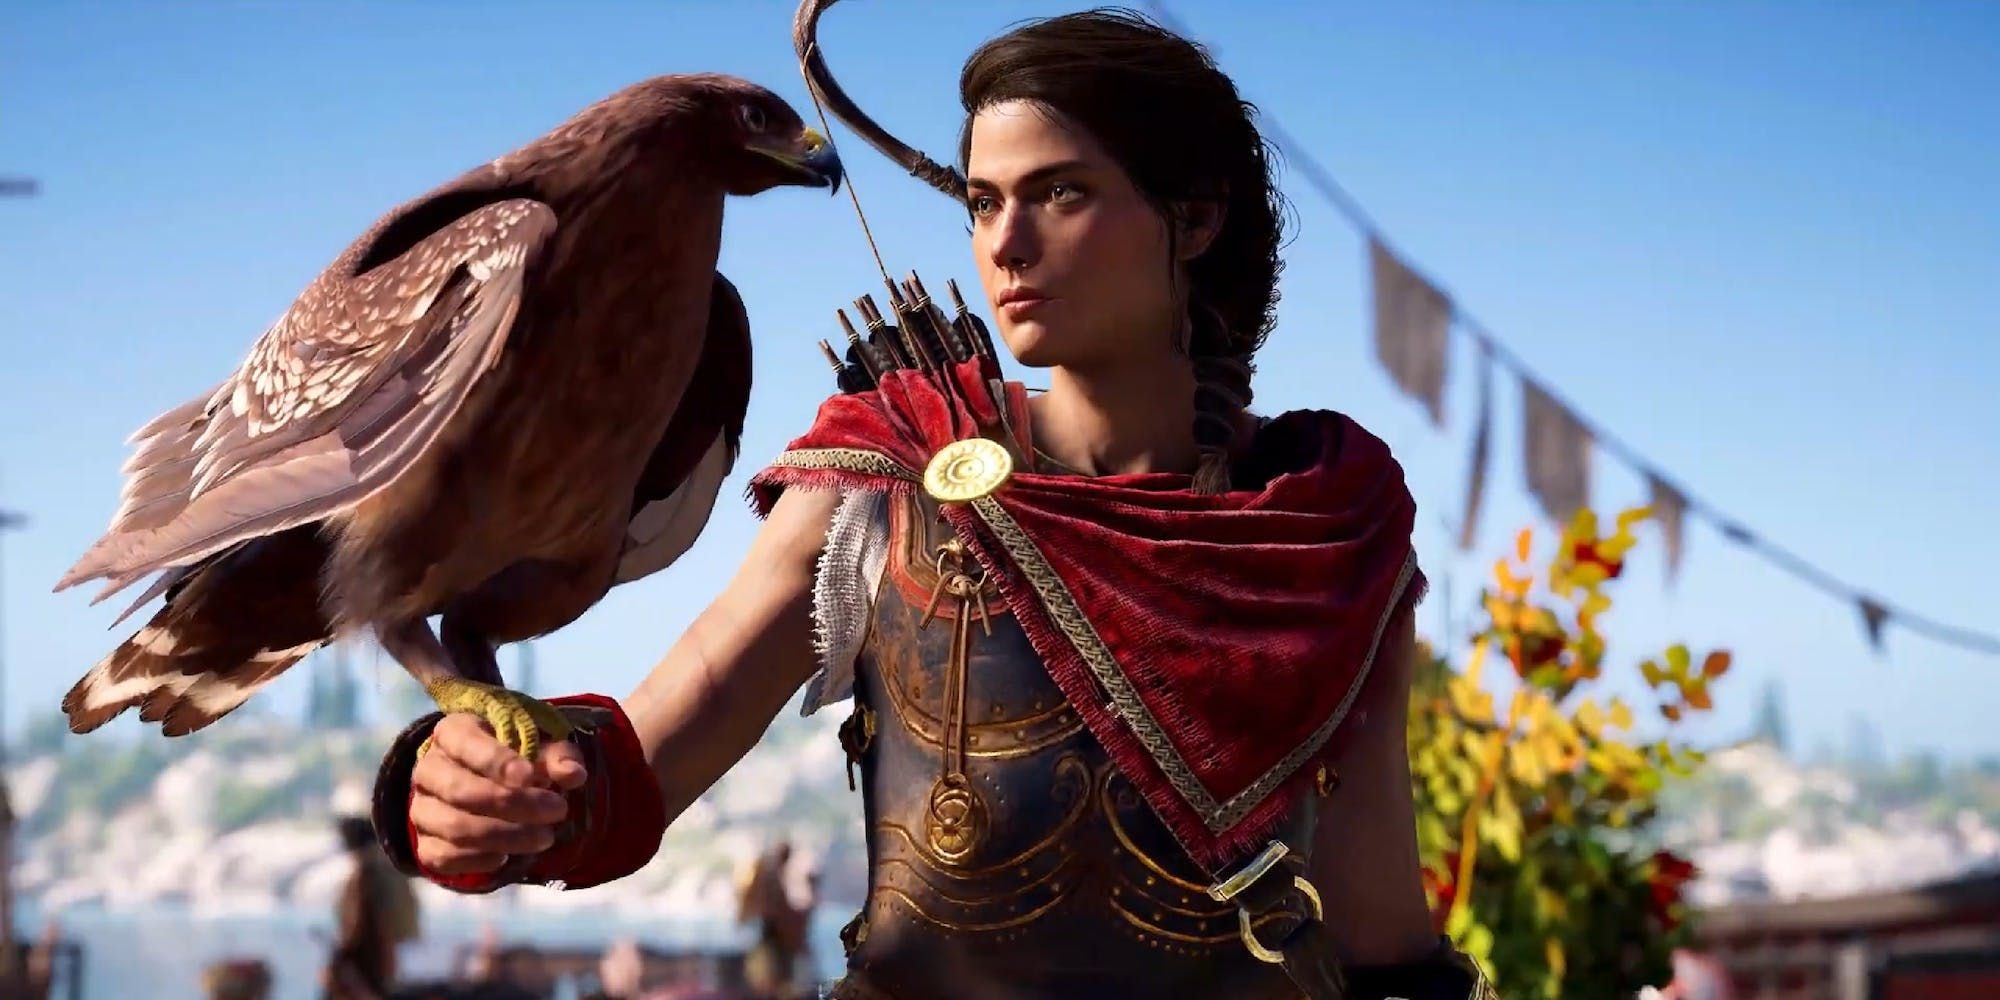 15 Things We Already Know About Assassins Creed Odyssey (And 10 Likely Rumors)